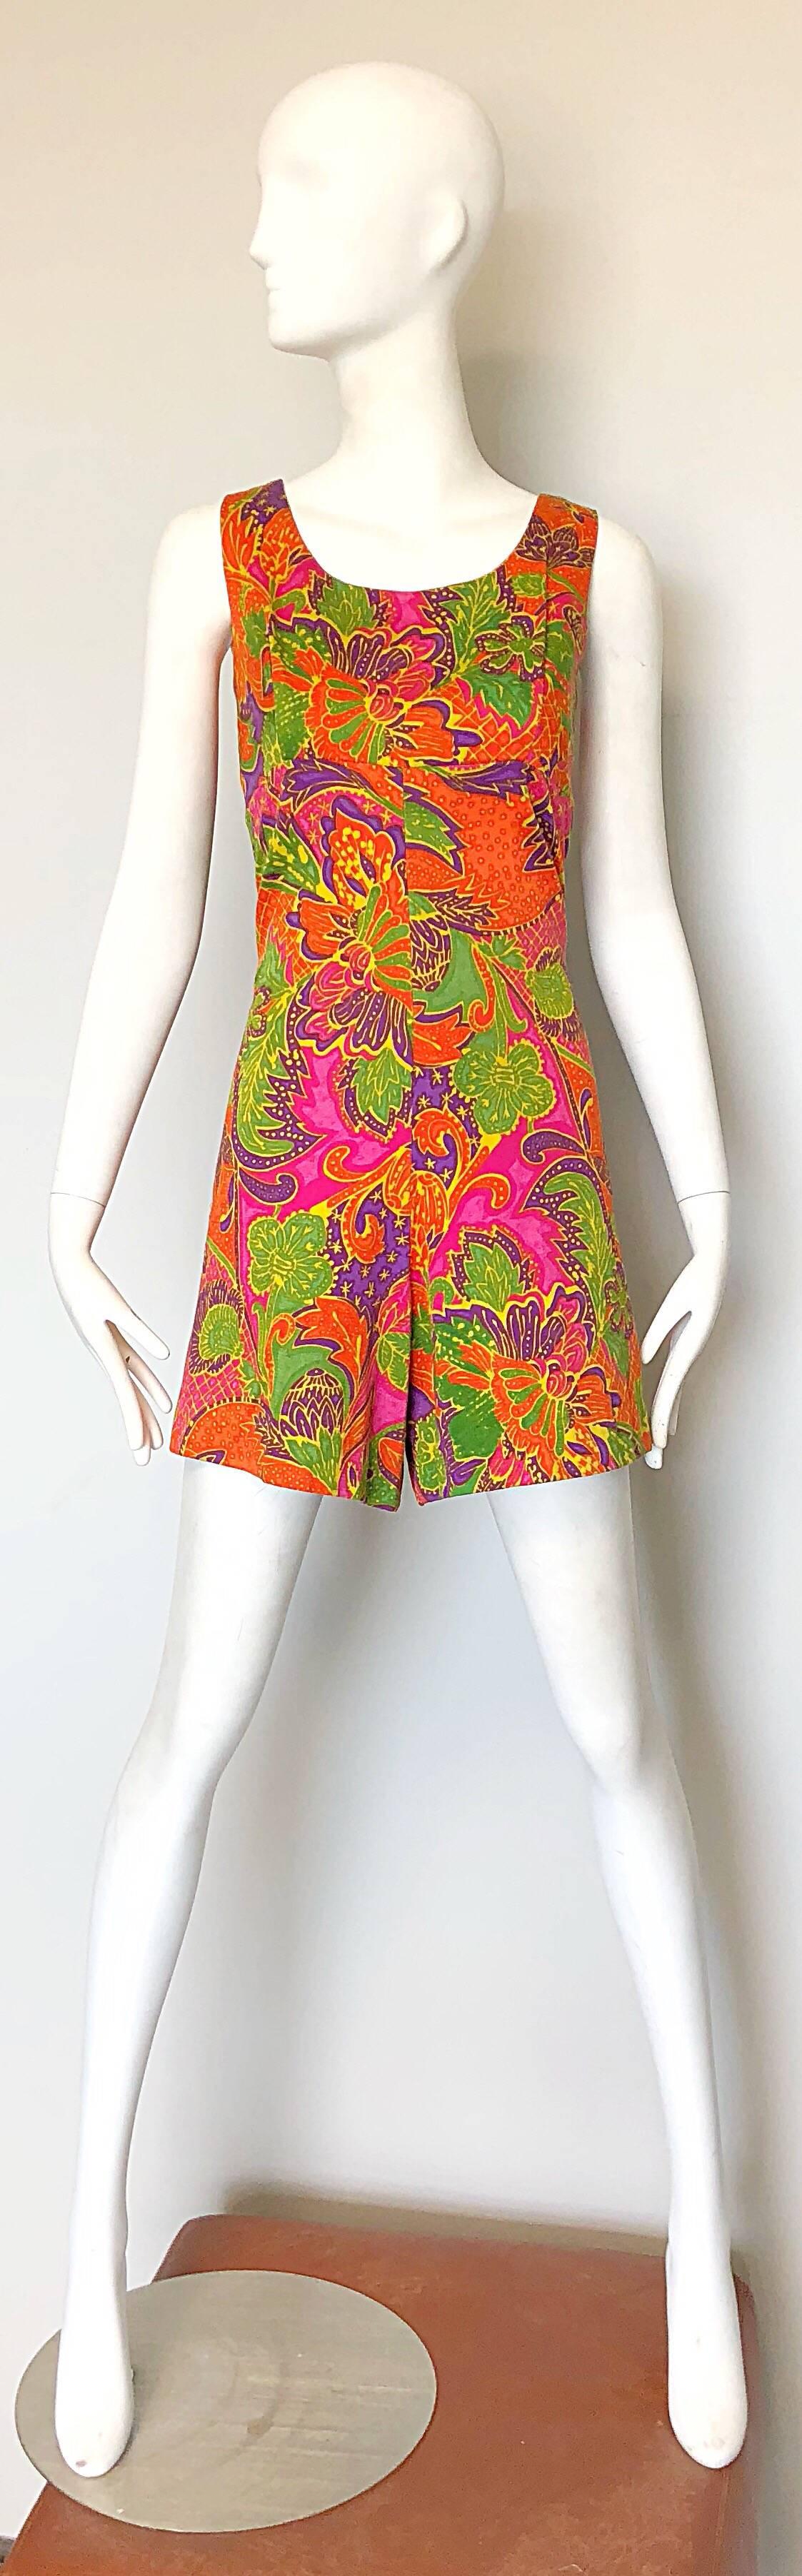 Rare 1960s ALFRED SHAHEEN colorful tropical jumpsuit romper! Features colorful tropical Hawaiian prints throughout. Vibrant colors of orange, purple, hot pink, yellow and green throughout. Full metal zipper up the back with hook-and-eye closure.